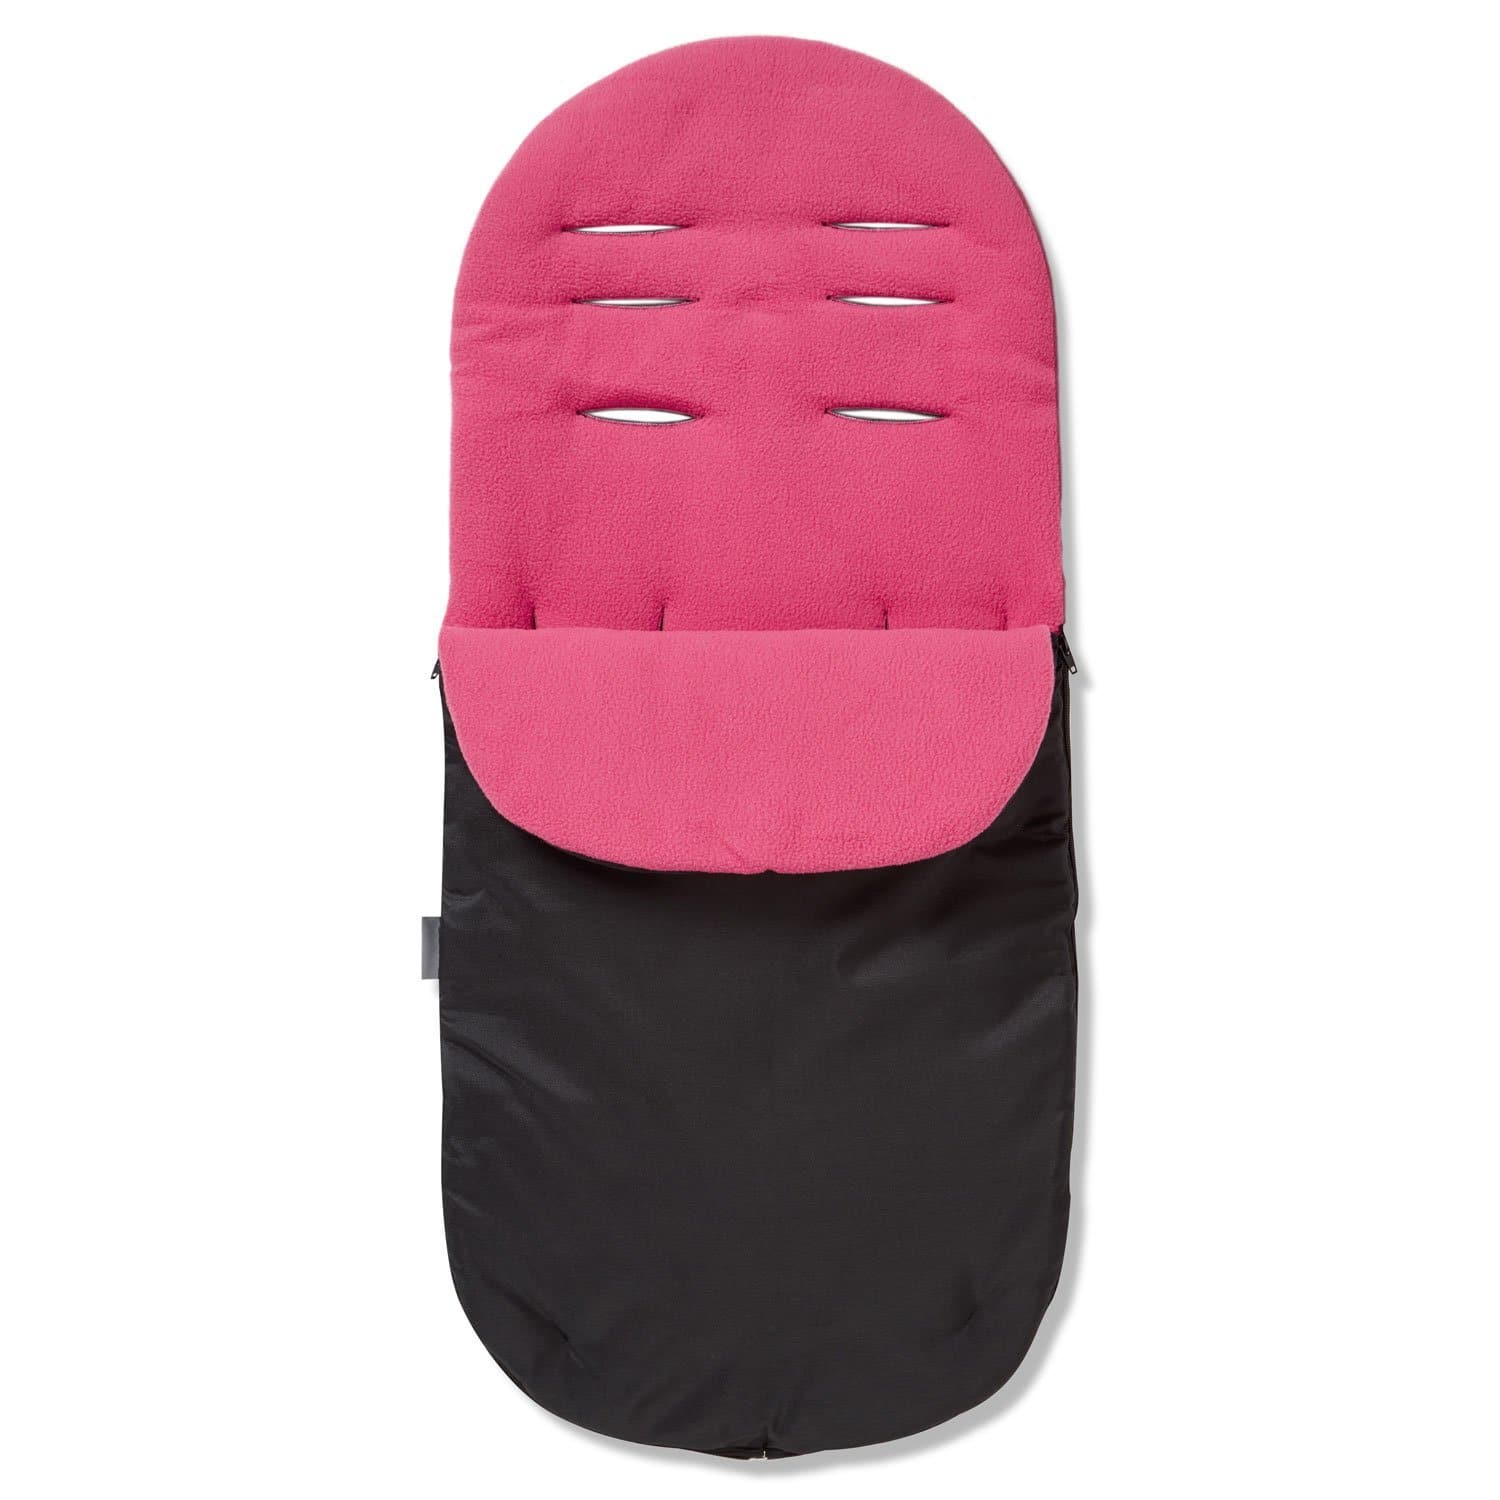 Footmuff / Cosy Toes Compatible with Kiddicouture - For Your Little One